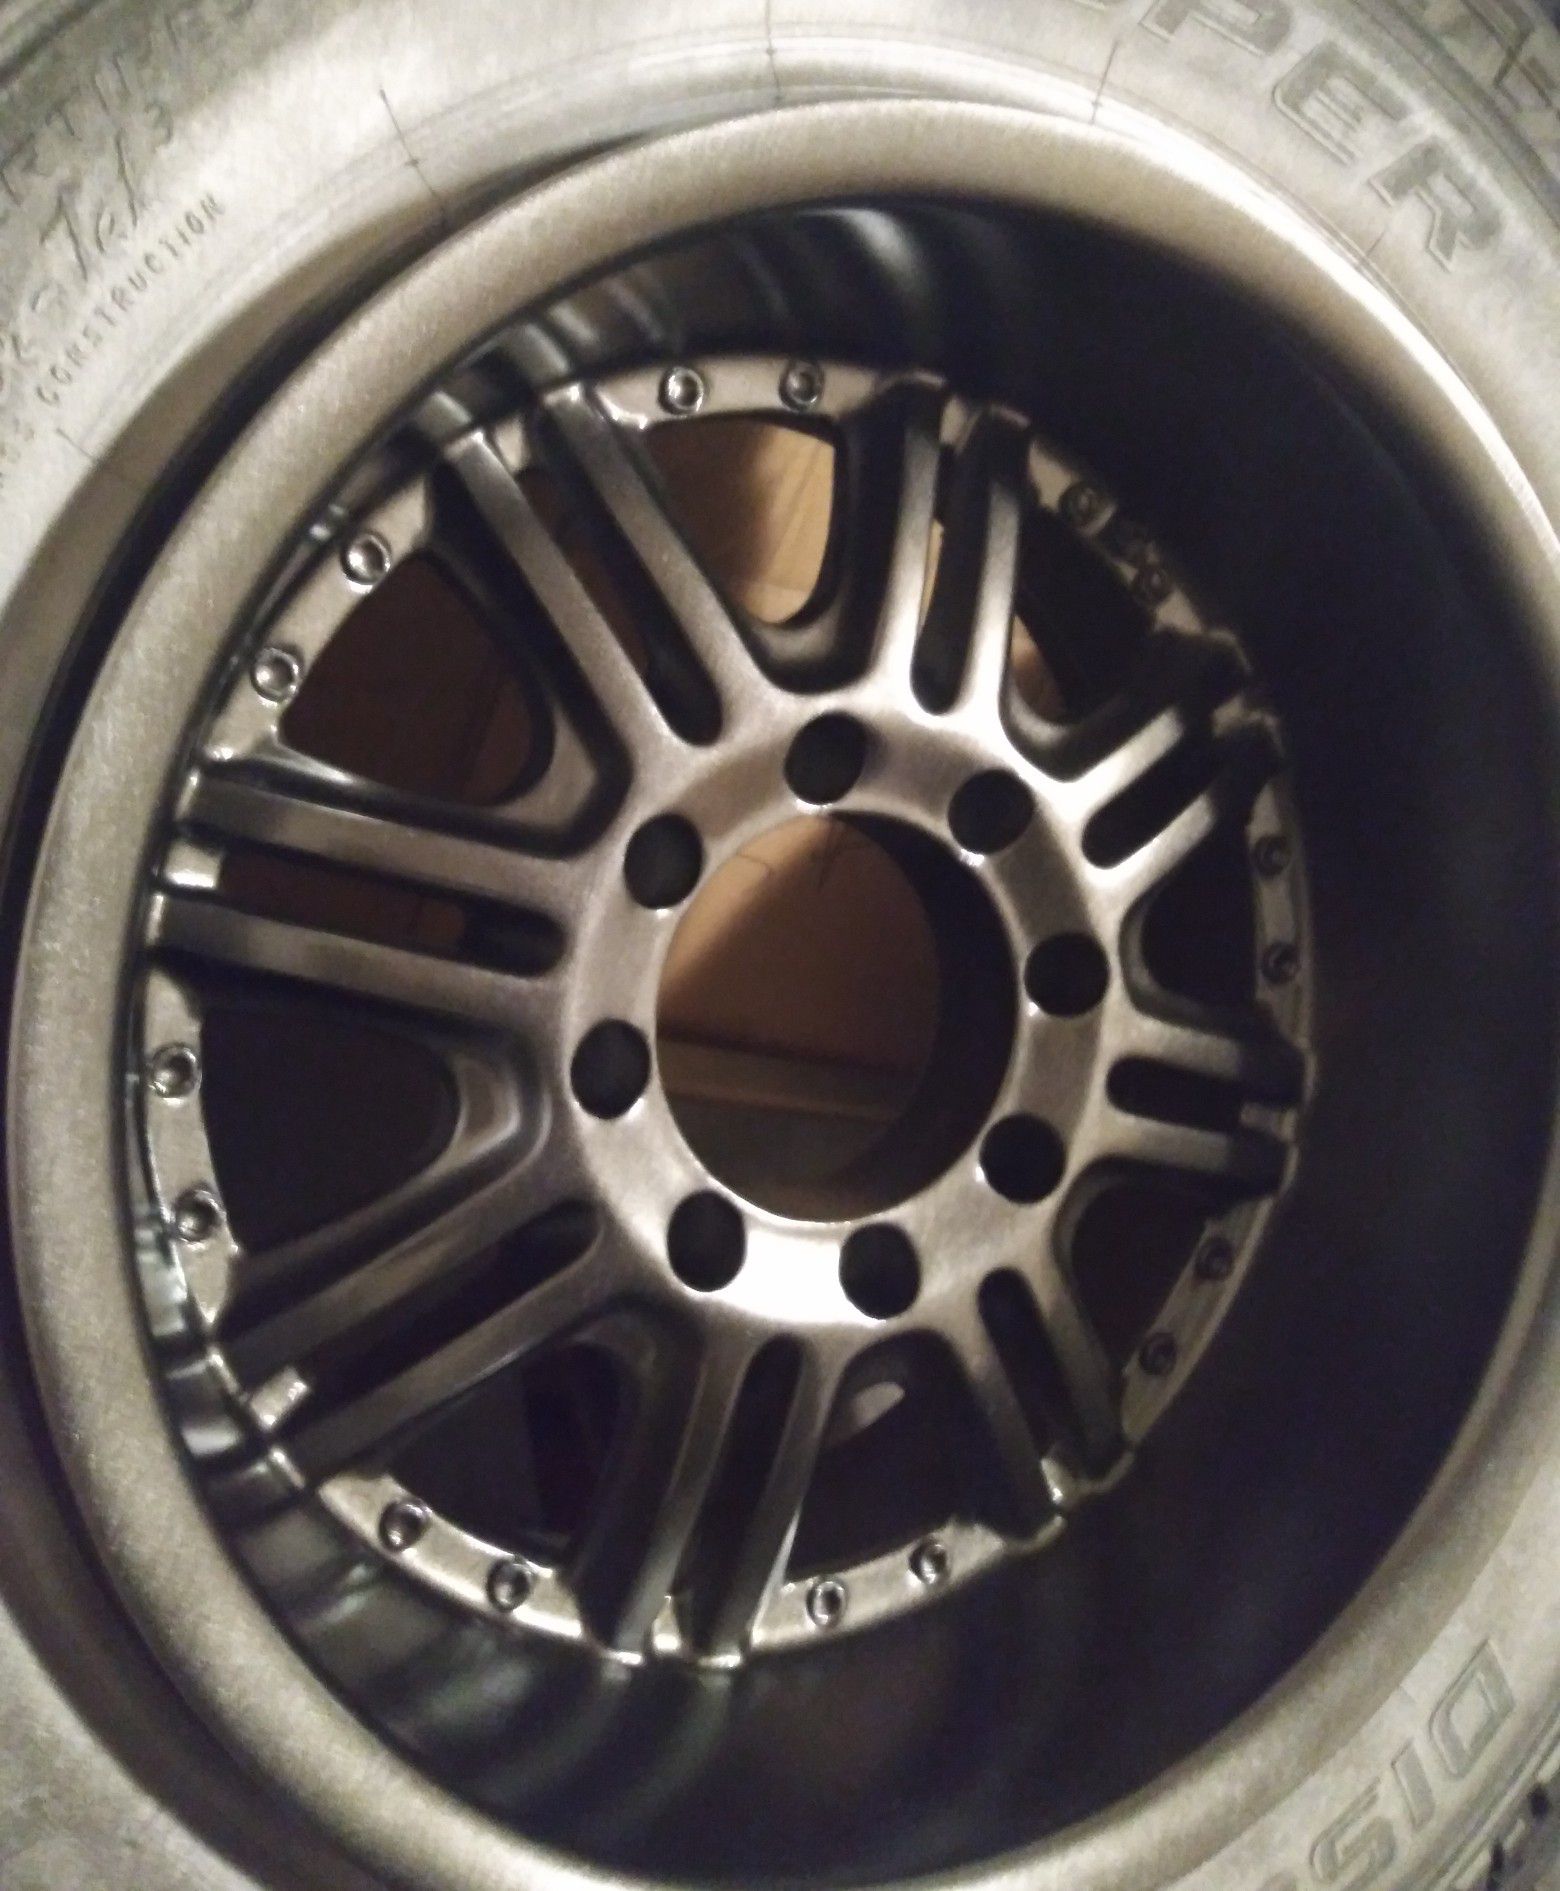 (4 rims 8 LUG) DIP Wicked 18in . $80 there in my truck don't feel like messing with them after no show last night